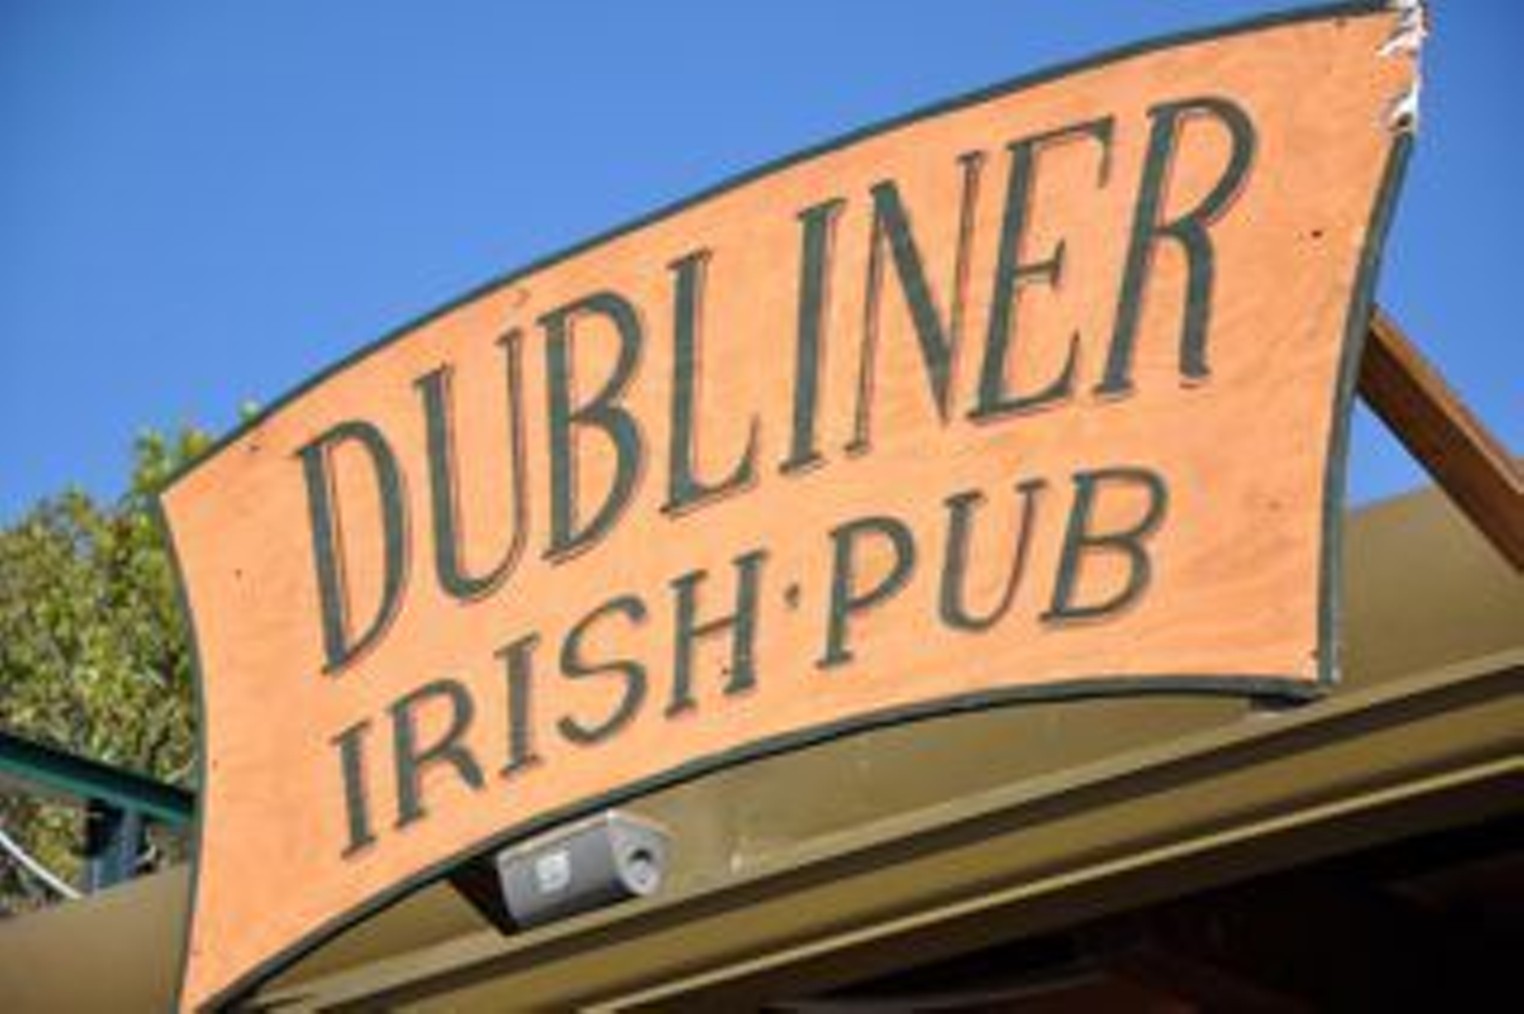 Best Irish bar 2000 The Dubliner Best of Dallas® 2020 Best Restaurants, Bars, Clubs, Music and Stores in Dallas Dallas Observer